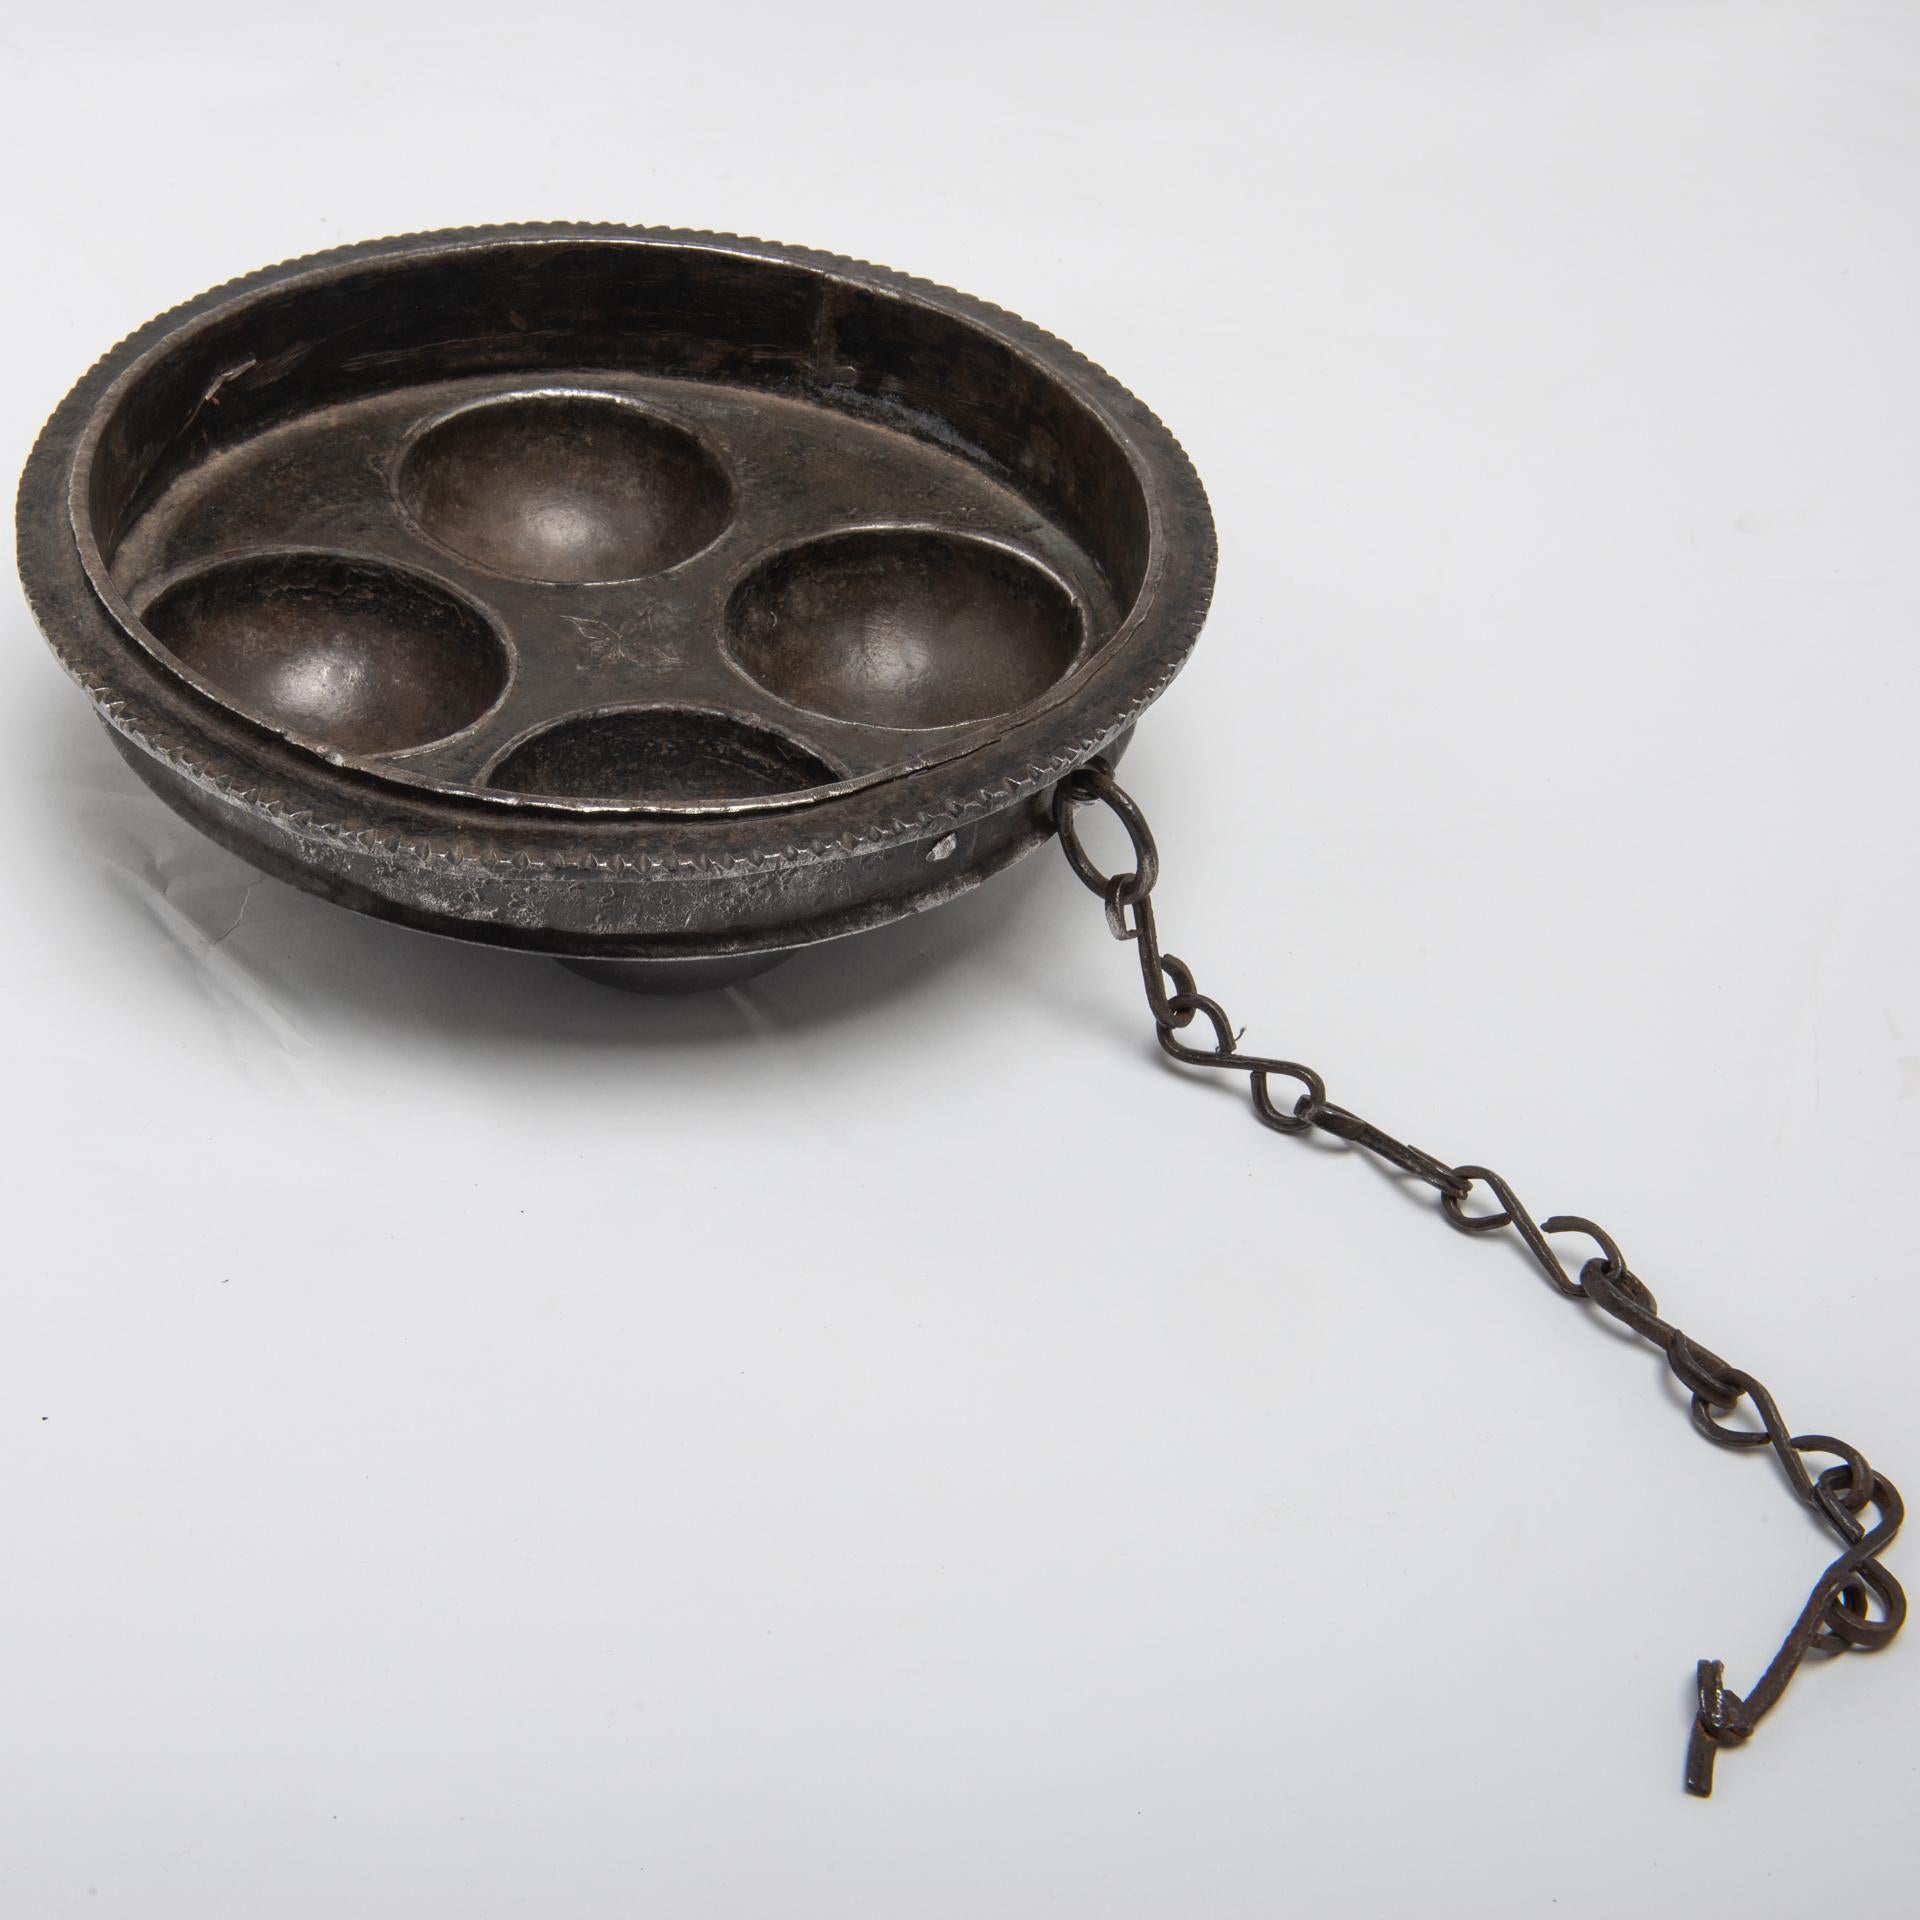 Hand-Crafted Antique Strange Iron Pot with Chain For Sale